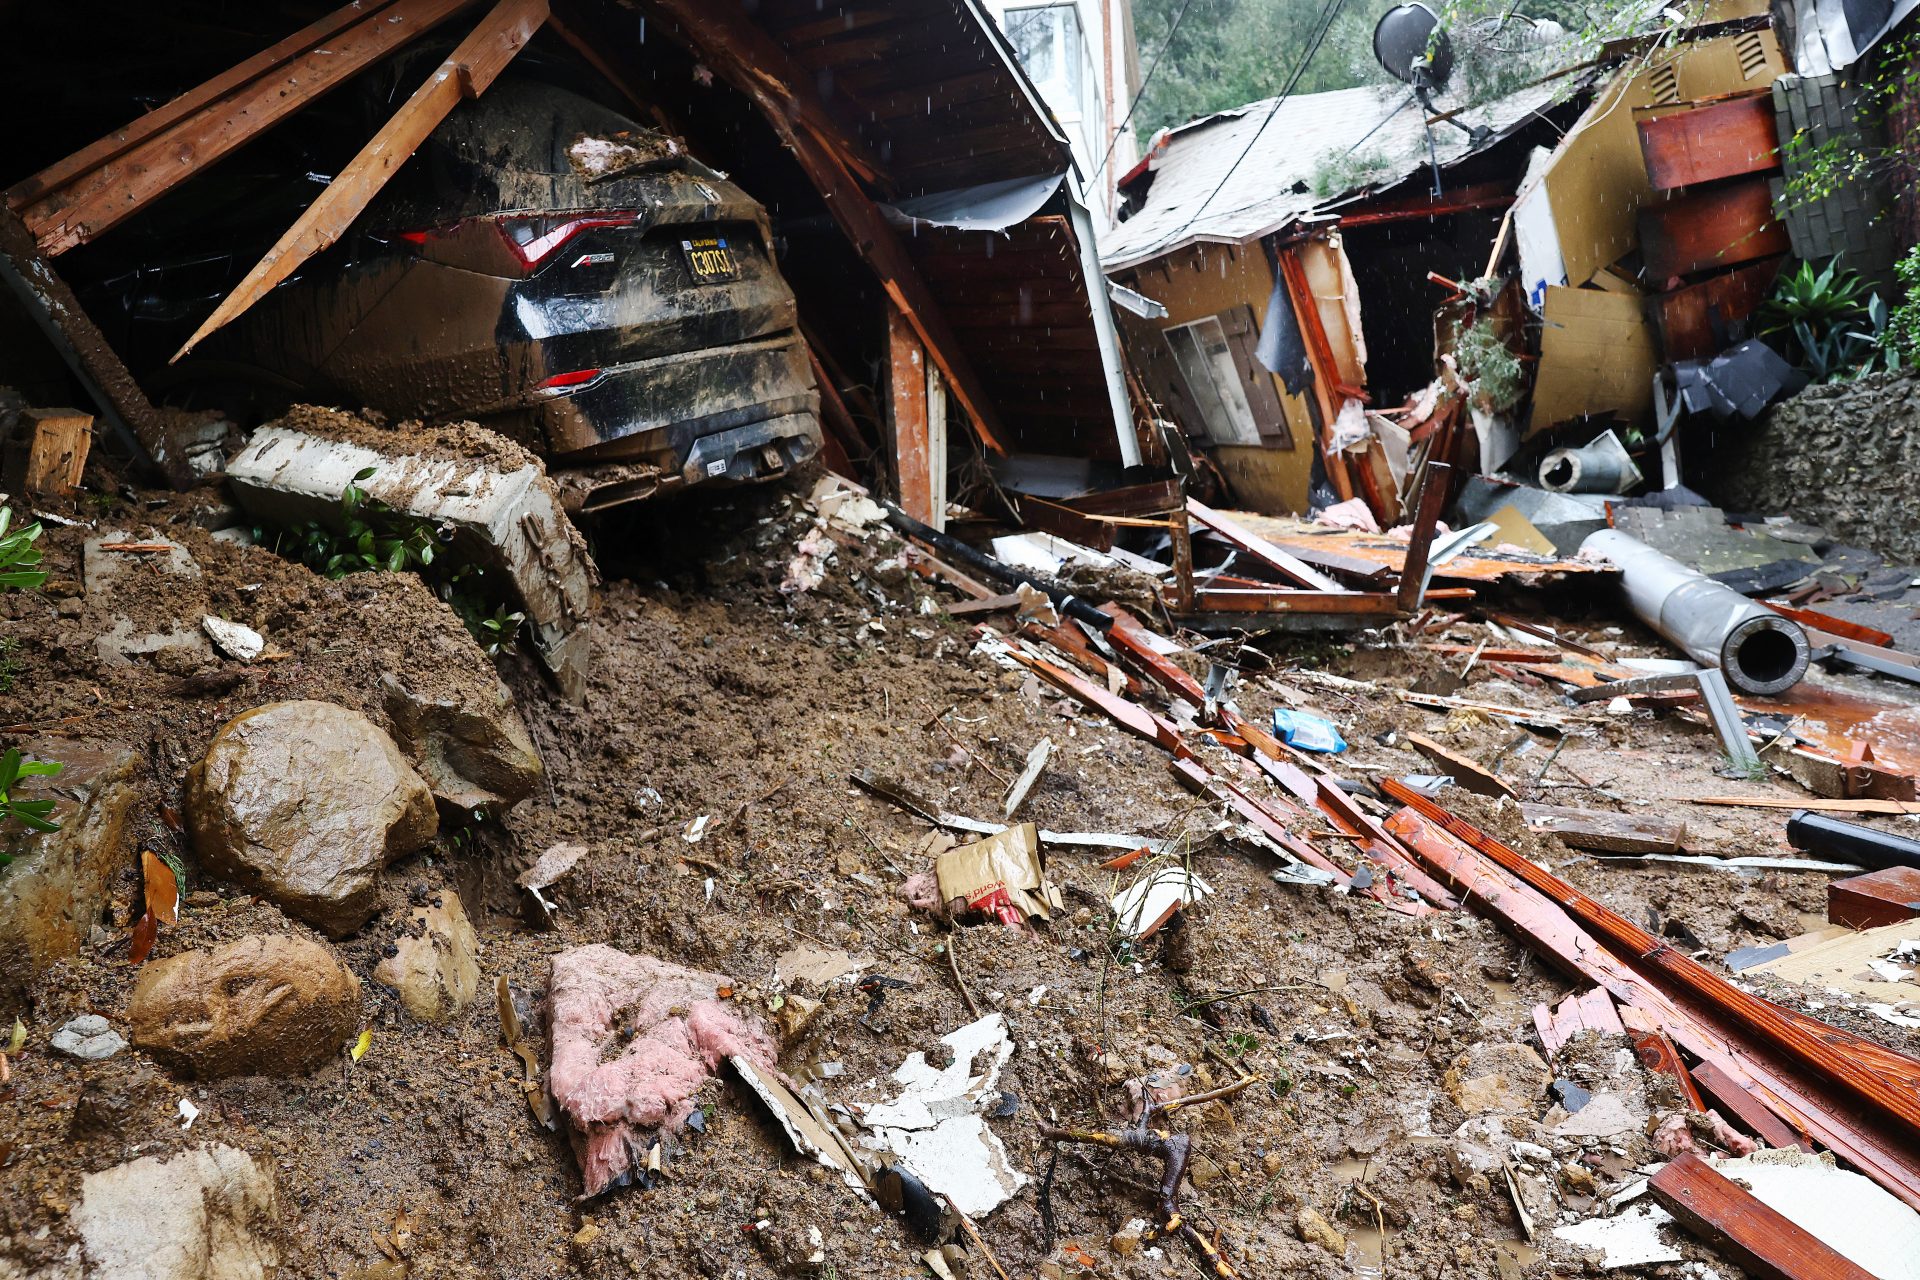 Mudslides have damaged homes in several areas of the state